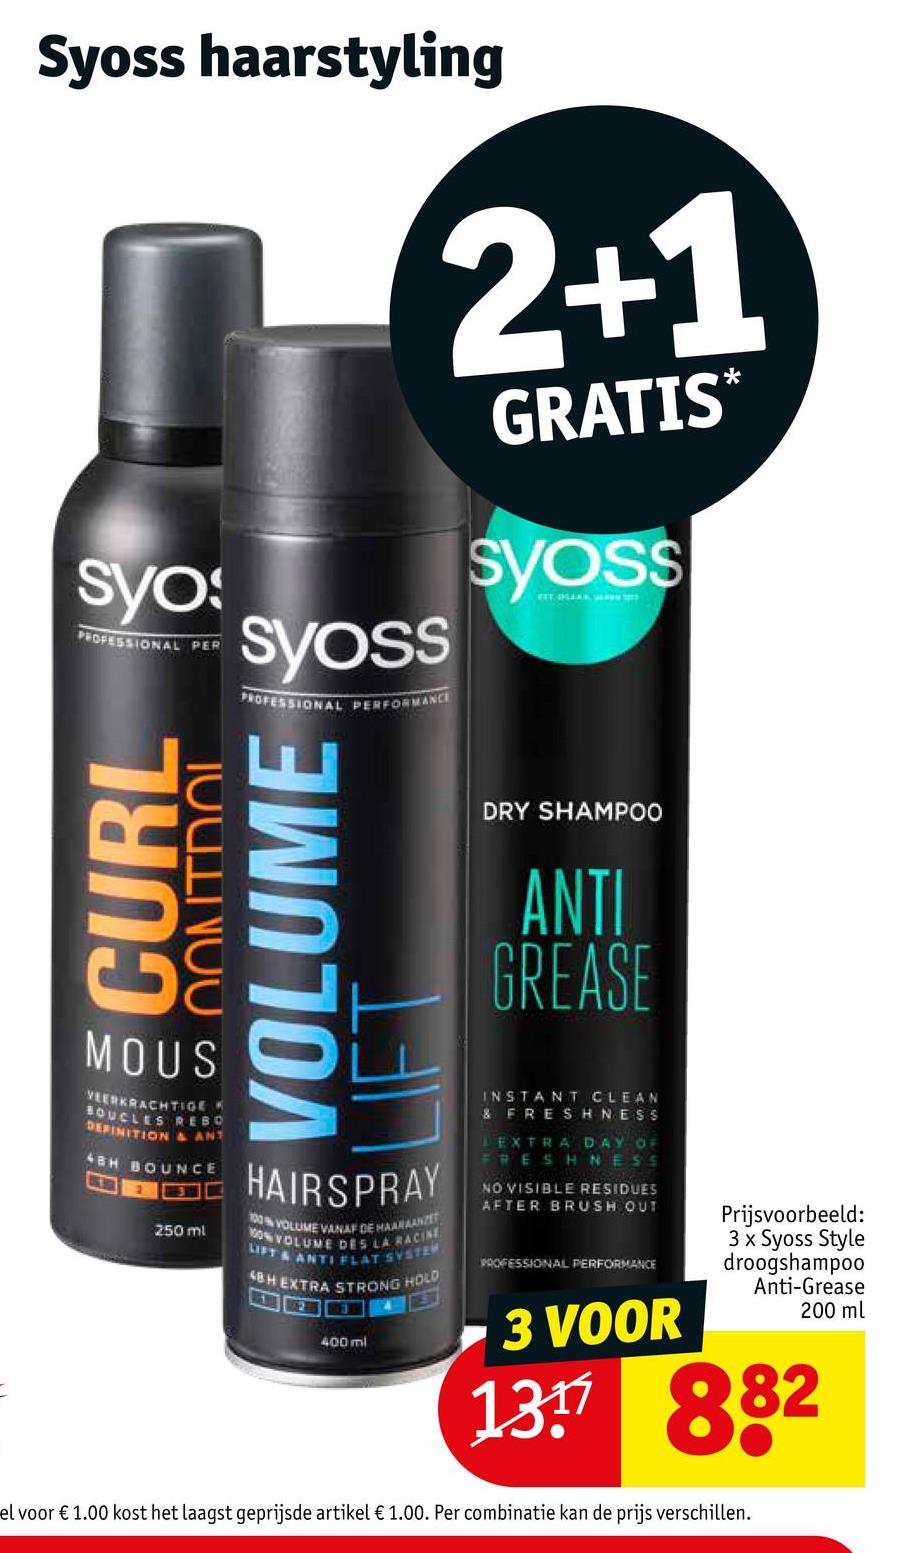 Syoss haarstyling
syos
PROFESSIONAL PER
CURL
TOUNOU
MOUS
VEERKRACHTIGE
BOUCLES REBO
DEFINITION & ANT
ABH BOUNCE
EX
250 ml
2+1
GRATIS*
syoss
PROFESSIONAL PERFORMANCE
VOLUME
syoss
DRY SHAMPOO
ANTI
GREASE
INSTANT CLEAN
& FRESHNESS
LEXTRA DAY OF
FRESHNESS
NO VISIBLE RESIDUES
AFTER BRUSH OUT
PROFESSIONAL PERFORMANCE
HAIRSPRAY
100% VOLUME VANAF DE HAARAANZET
100% VOLUME DES LA RACINE
LIFT & ANTI FLAT SYSTEM
4BH EXTRA STRONG HOLD
BGKAT DES
3 VOOR
400 ml
1311 882
el voor € 1.00 kost het laagst geprijsde artikel € 1.00. Per combinatie kan de prijs verschillen.
Prijsvoorbeeld:
3 x Syoss Style
droogshampoo
Anti-Grease
200 ml